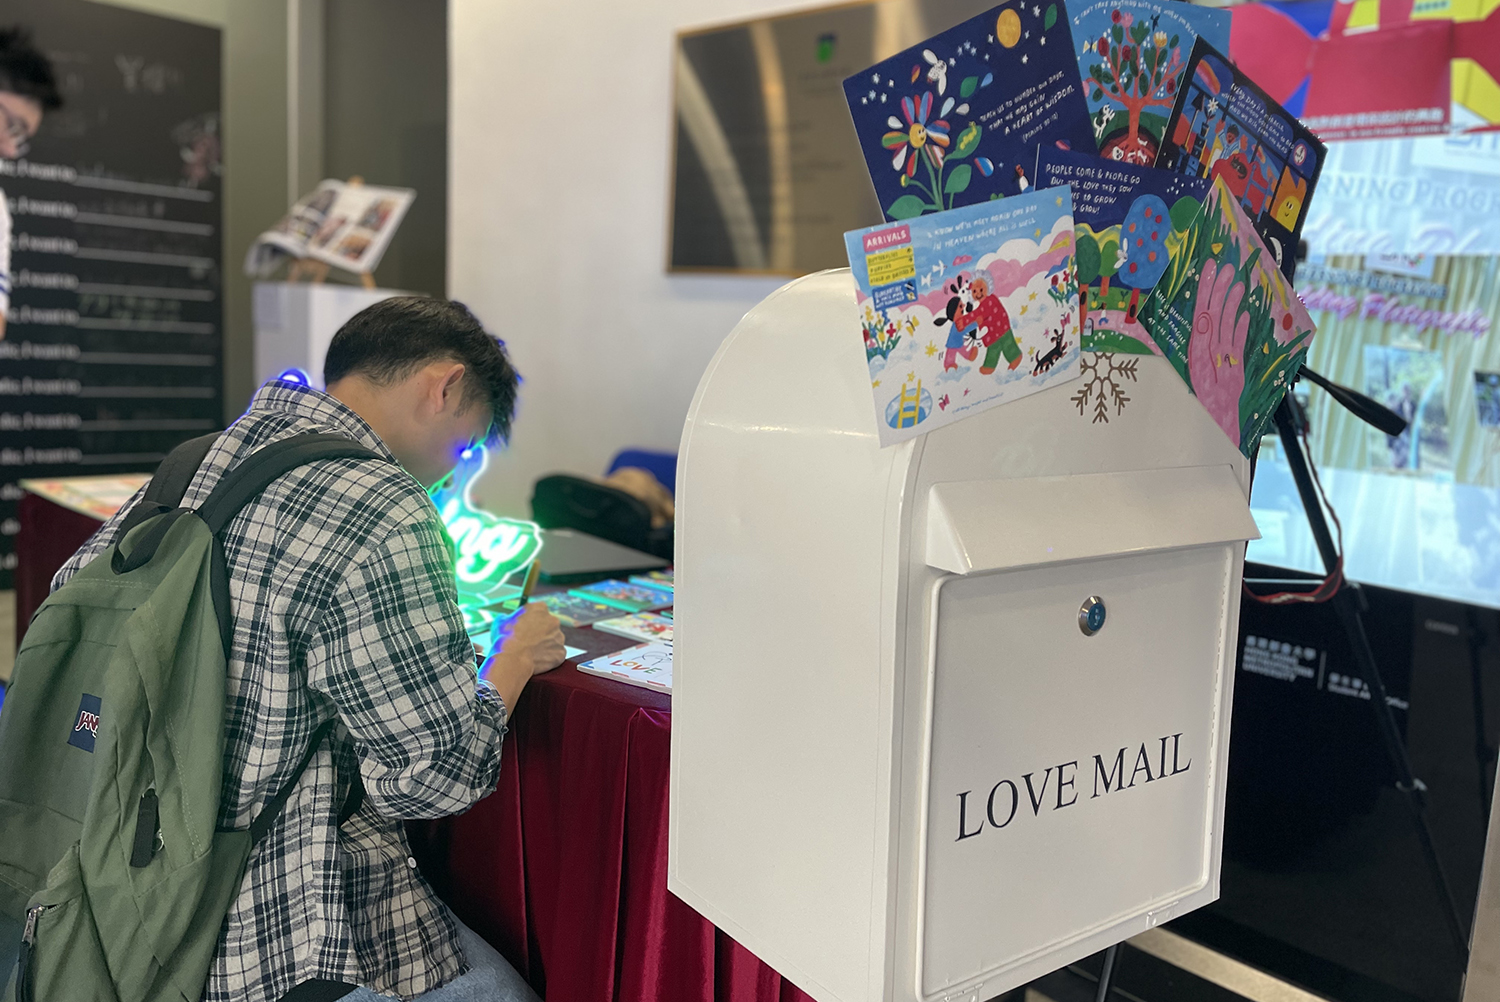 The “Love Mail” allows visitors to send heartfelt messages to their family and friends.